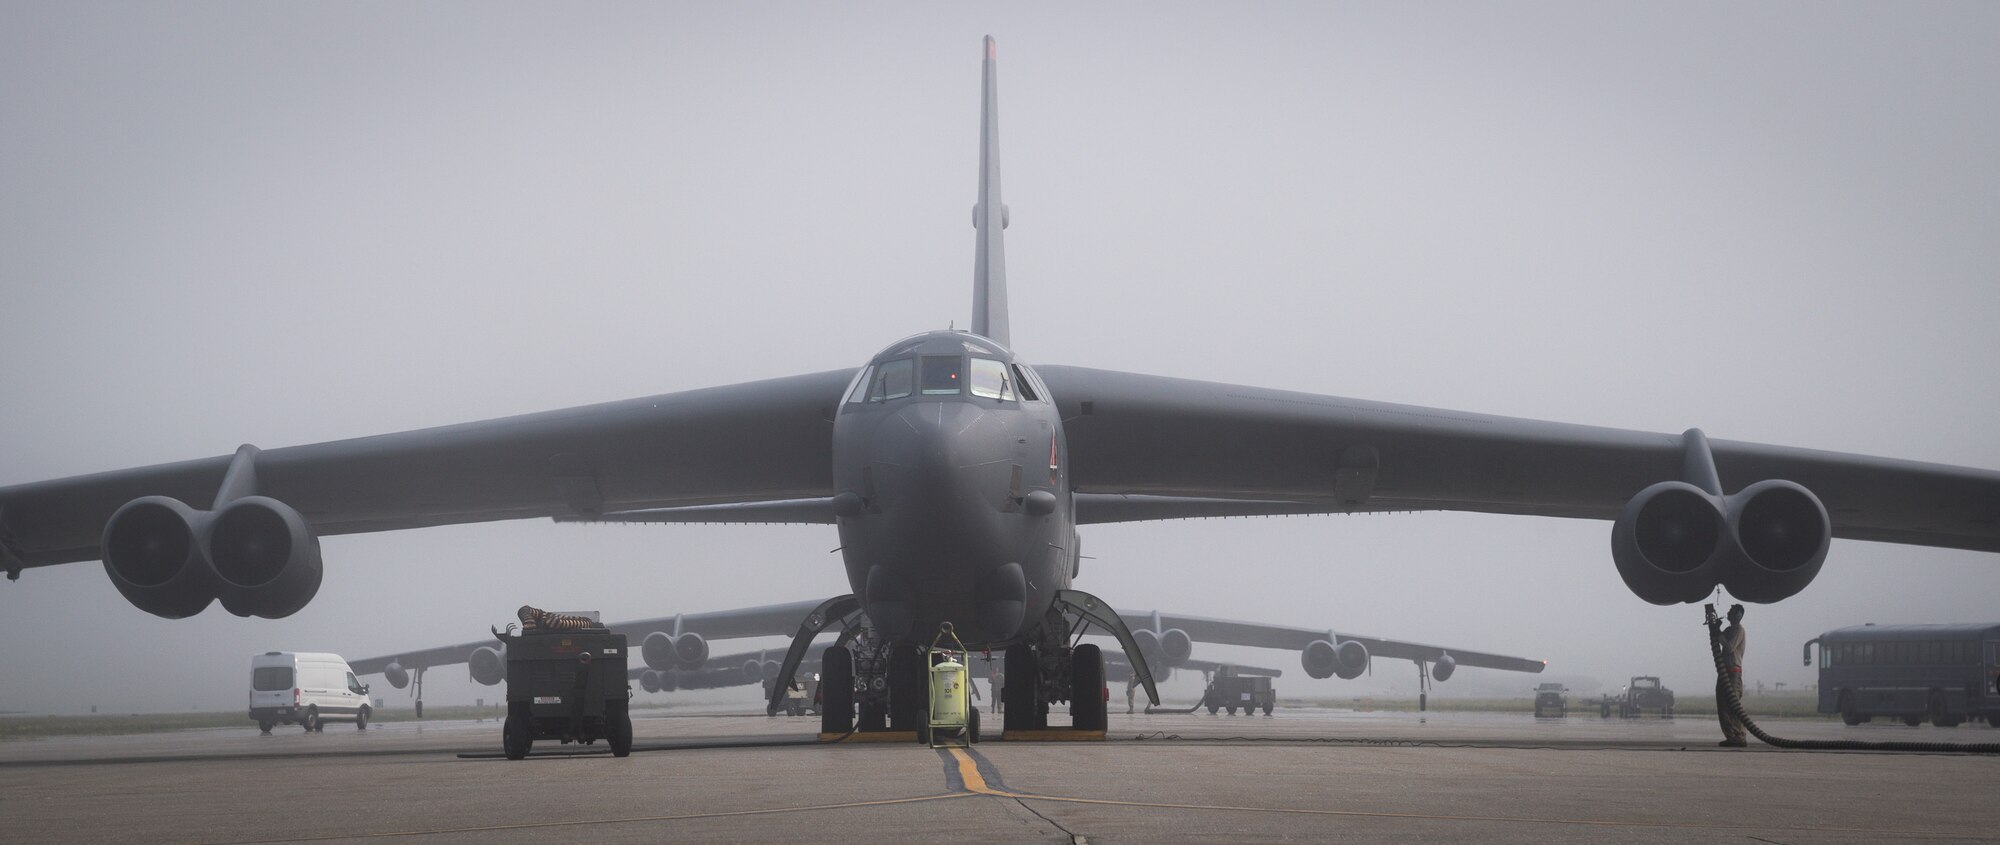 A B-52H Stratofortress deployed from Barksdale Air Force Base, La., prepares for take off from Eielson Air Force Base, Alaska, for a Bomber Task Force mission June 16, 2020. This Bomber Task Force brought B-52H Stratofortress bombers and 2nd Bomb Wing Airmen to the Indo-Pacific theater to test their ability to integrate and operate from a forward location. (U.S. Air Force photo by Senior Airman Lillian Miller)